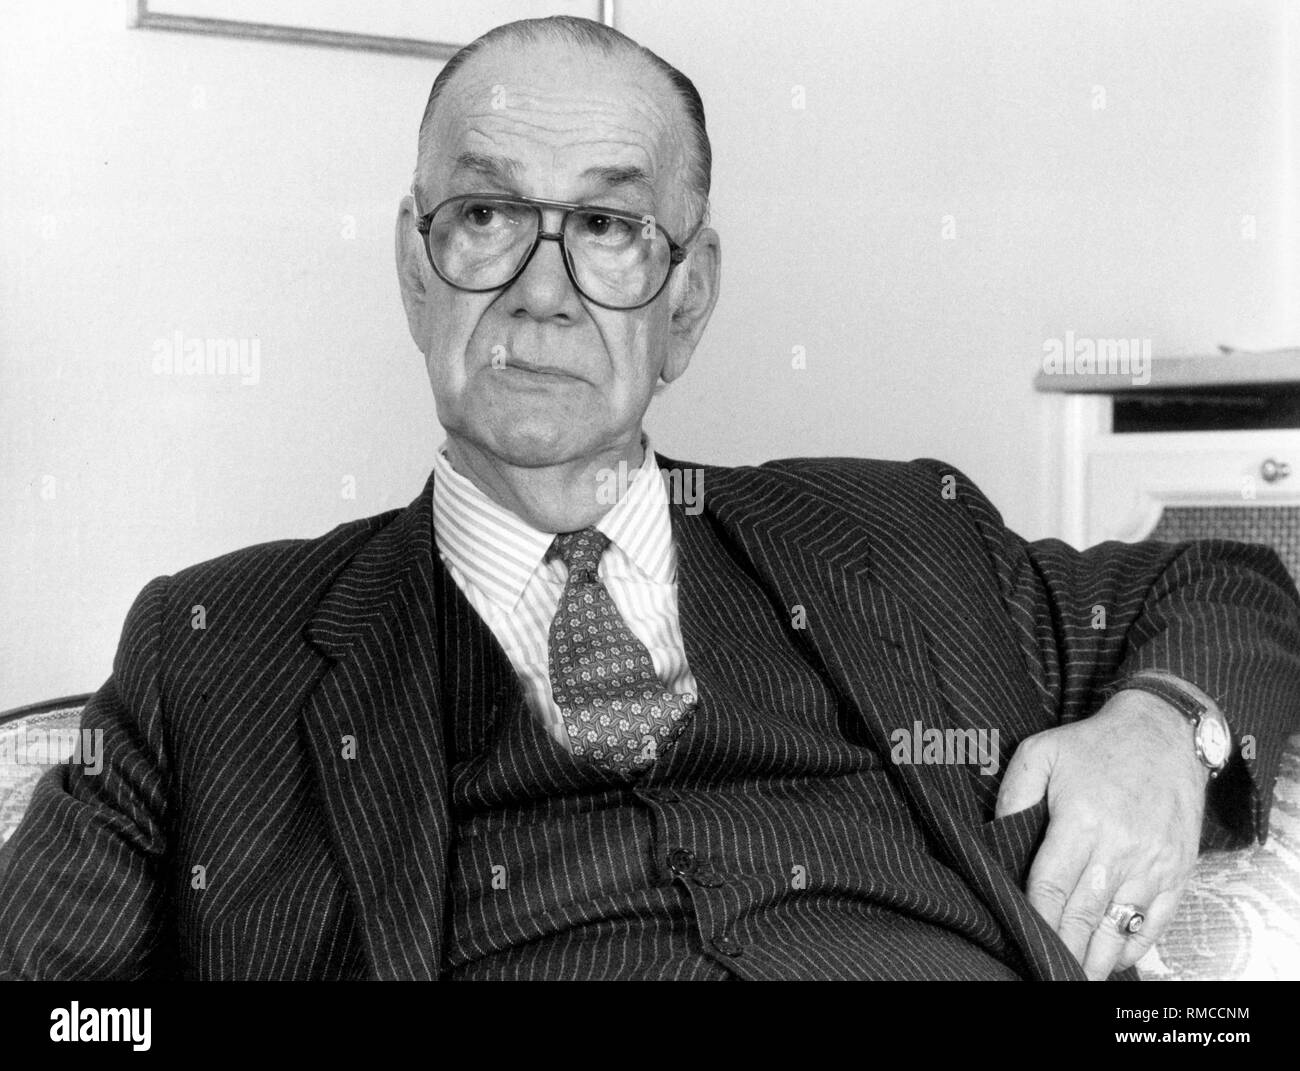 Camilo Jose Cela (1916-2002), Spanish writer. He received the Nobel Prize in Literature in 1989 for his novel "The Family of Pascual Duarte" published in 1942. Stock Photo